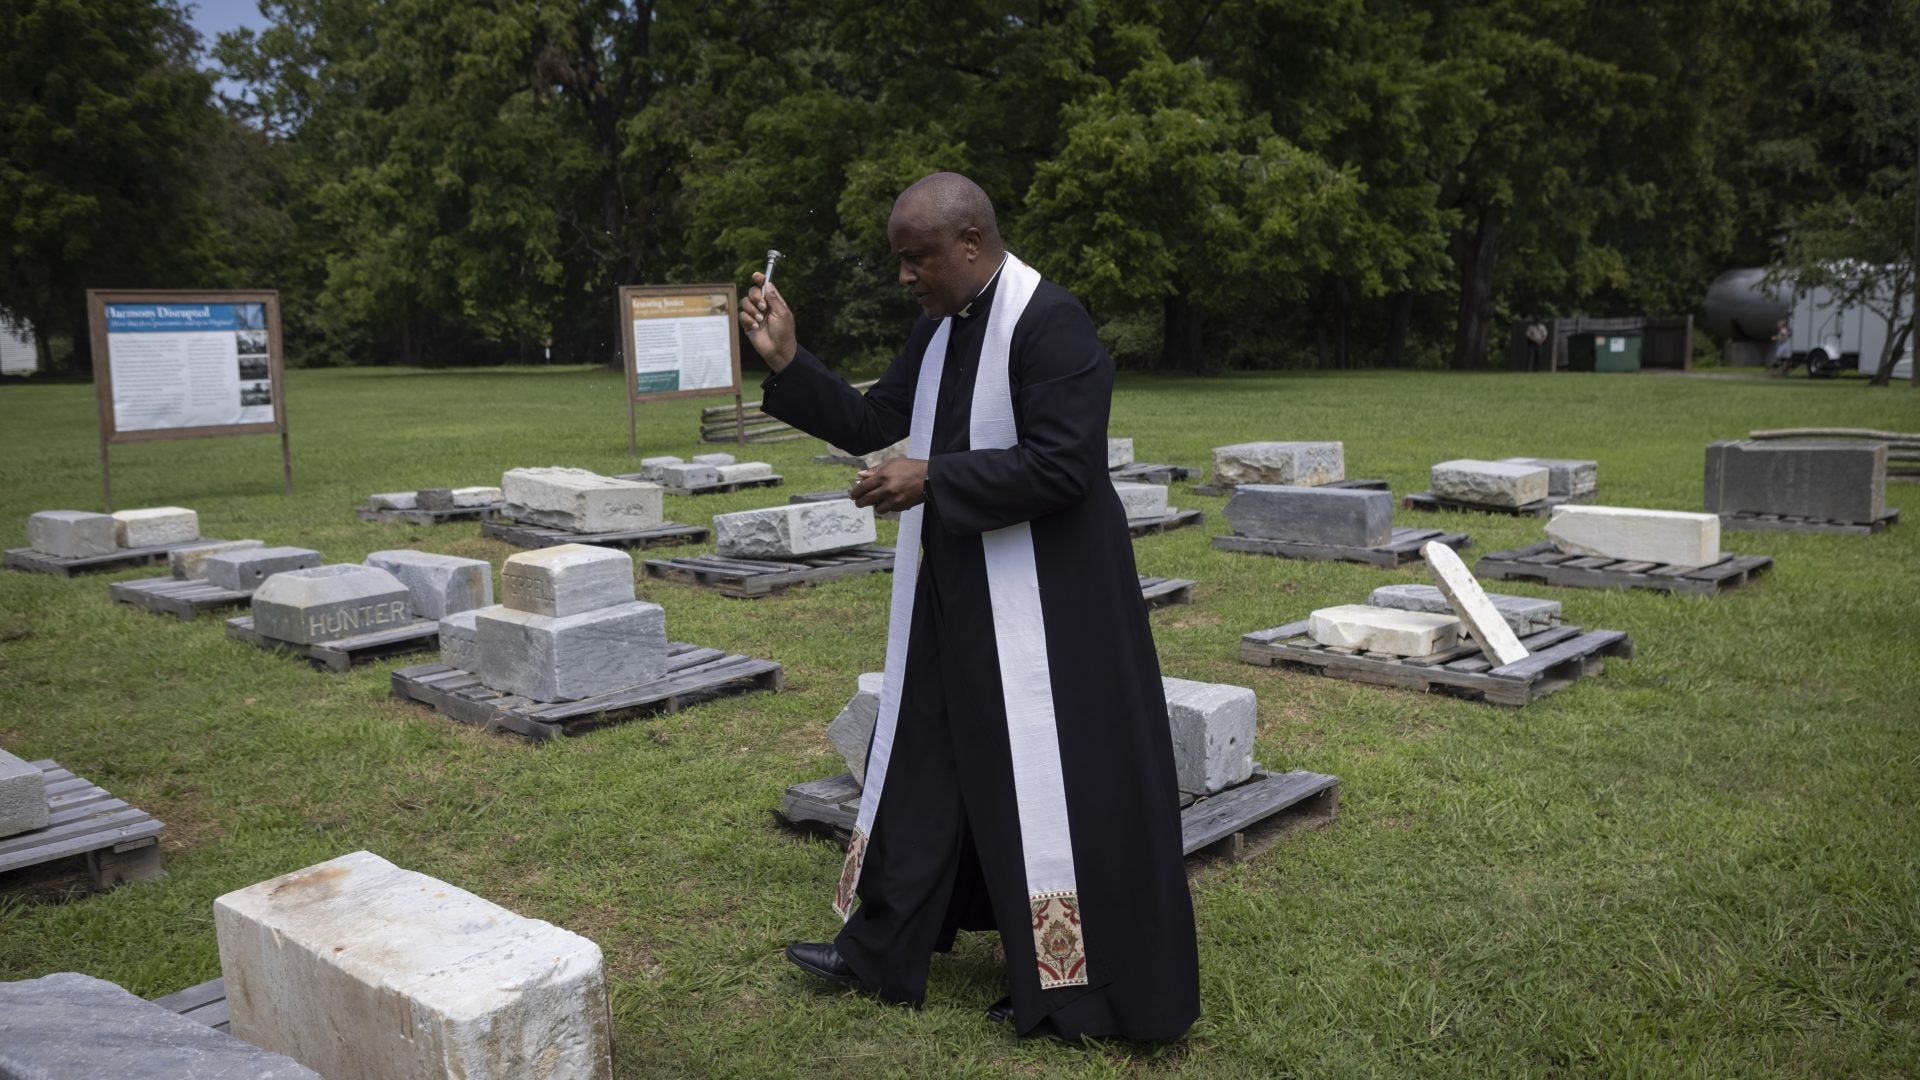 Headstones From a Historic African American Cemetery Were Found Being Used for Erosion Control